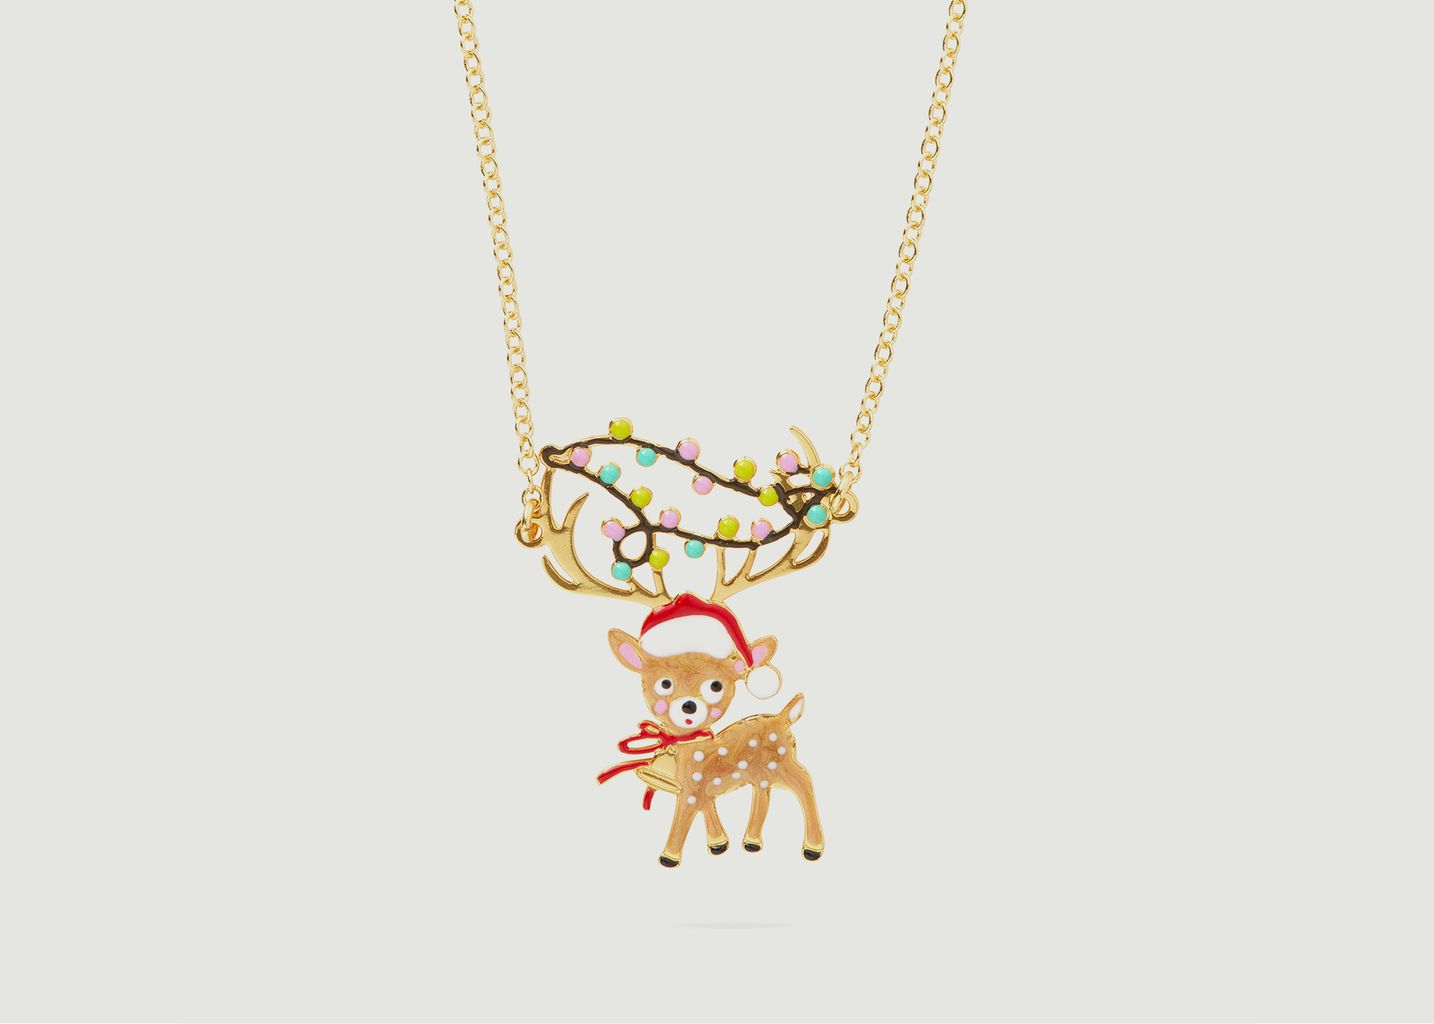 Necklace pendant reindeer and garland: - N2